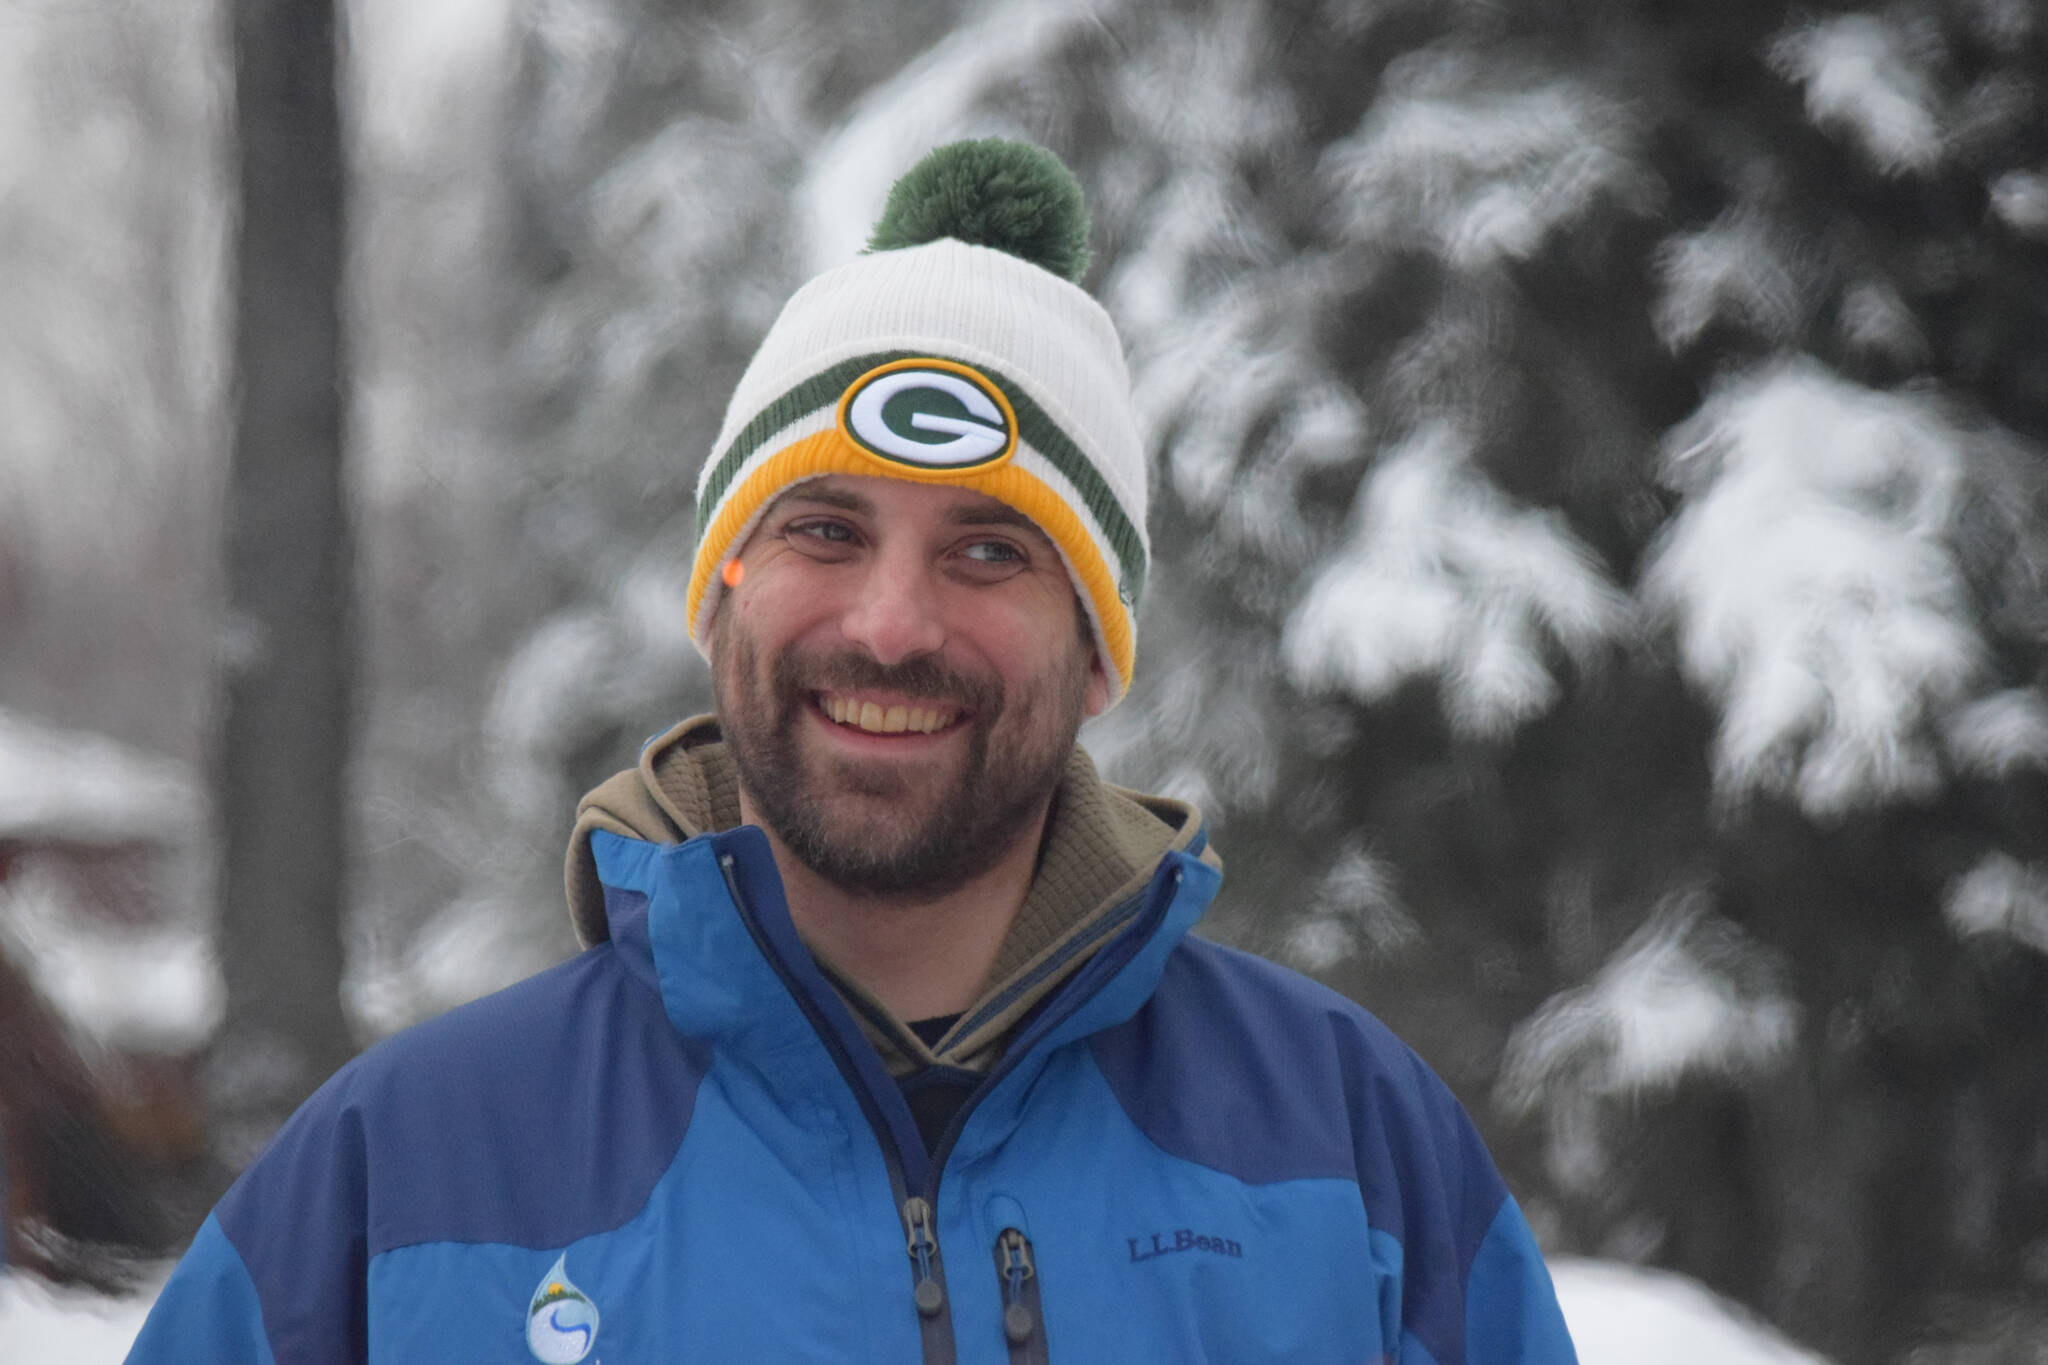 Branden Bornemann celebrates the 25th anniversary of the Kenai Watershed Forum on Thursday, Jan. 20, 2022. Bornemann will step down as executive director of the nonprofit this month, according to a release from the organization. (Camille Botello/Peninsula Clarion)